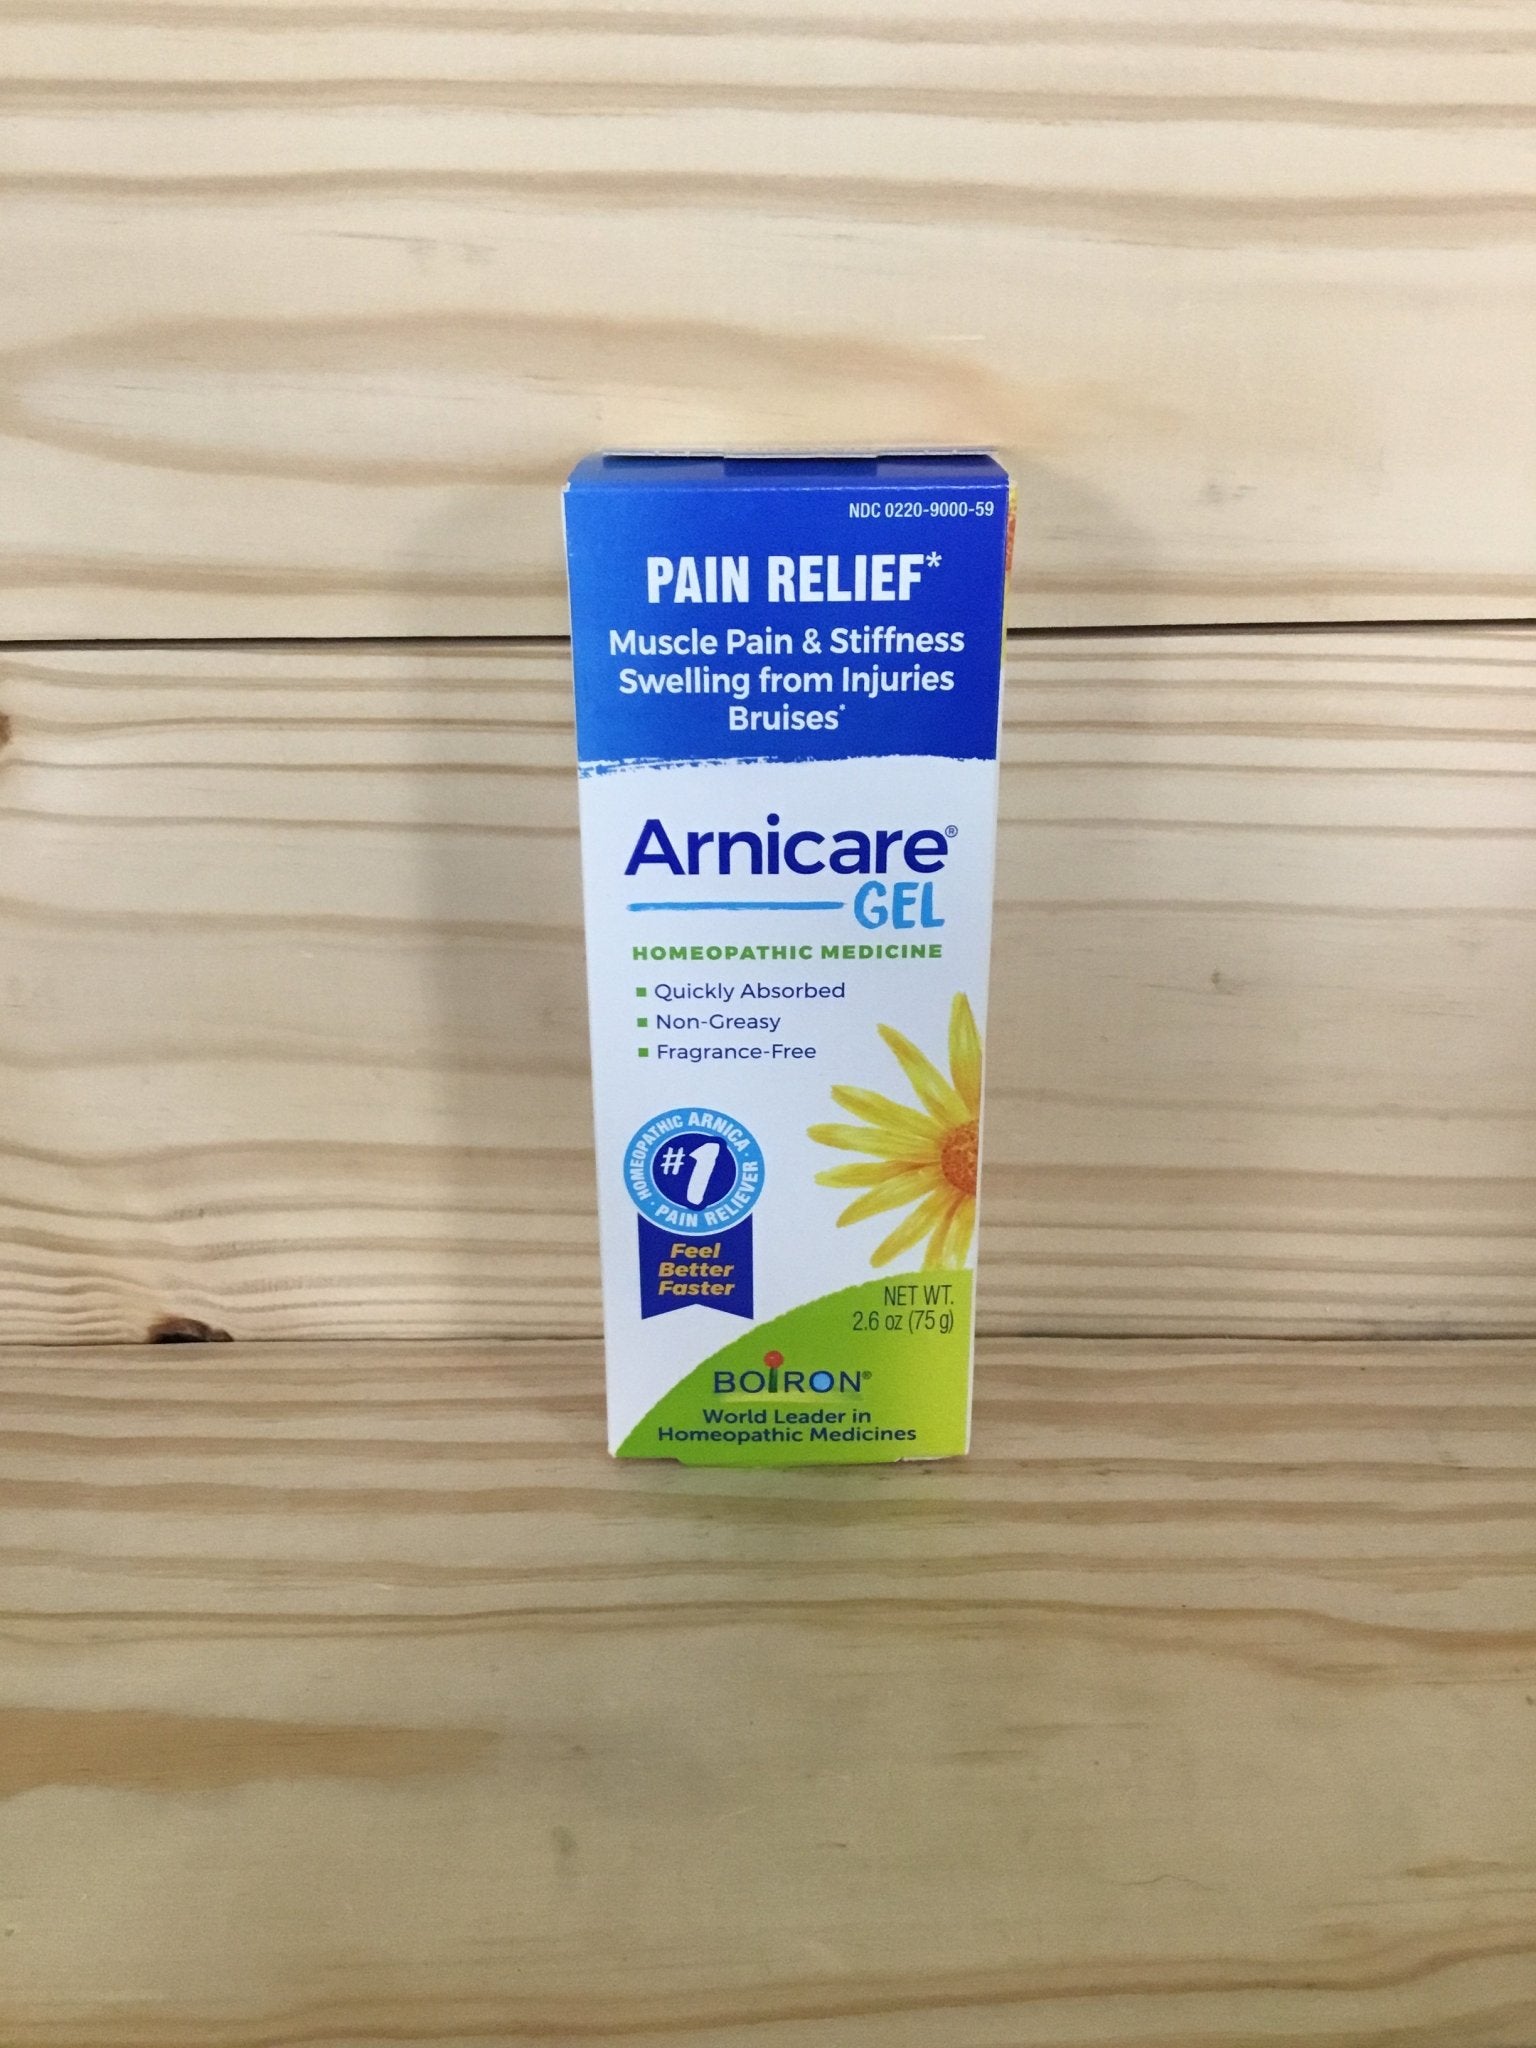 Boiron Arnicare Pain Relief Gel 2.6 oz - One Life Natural Market NC